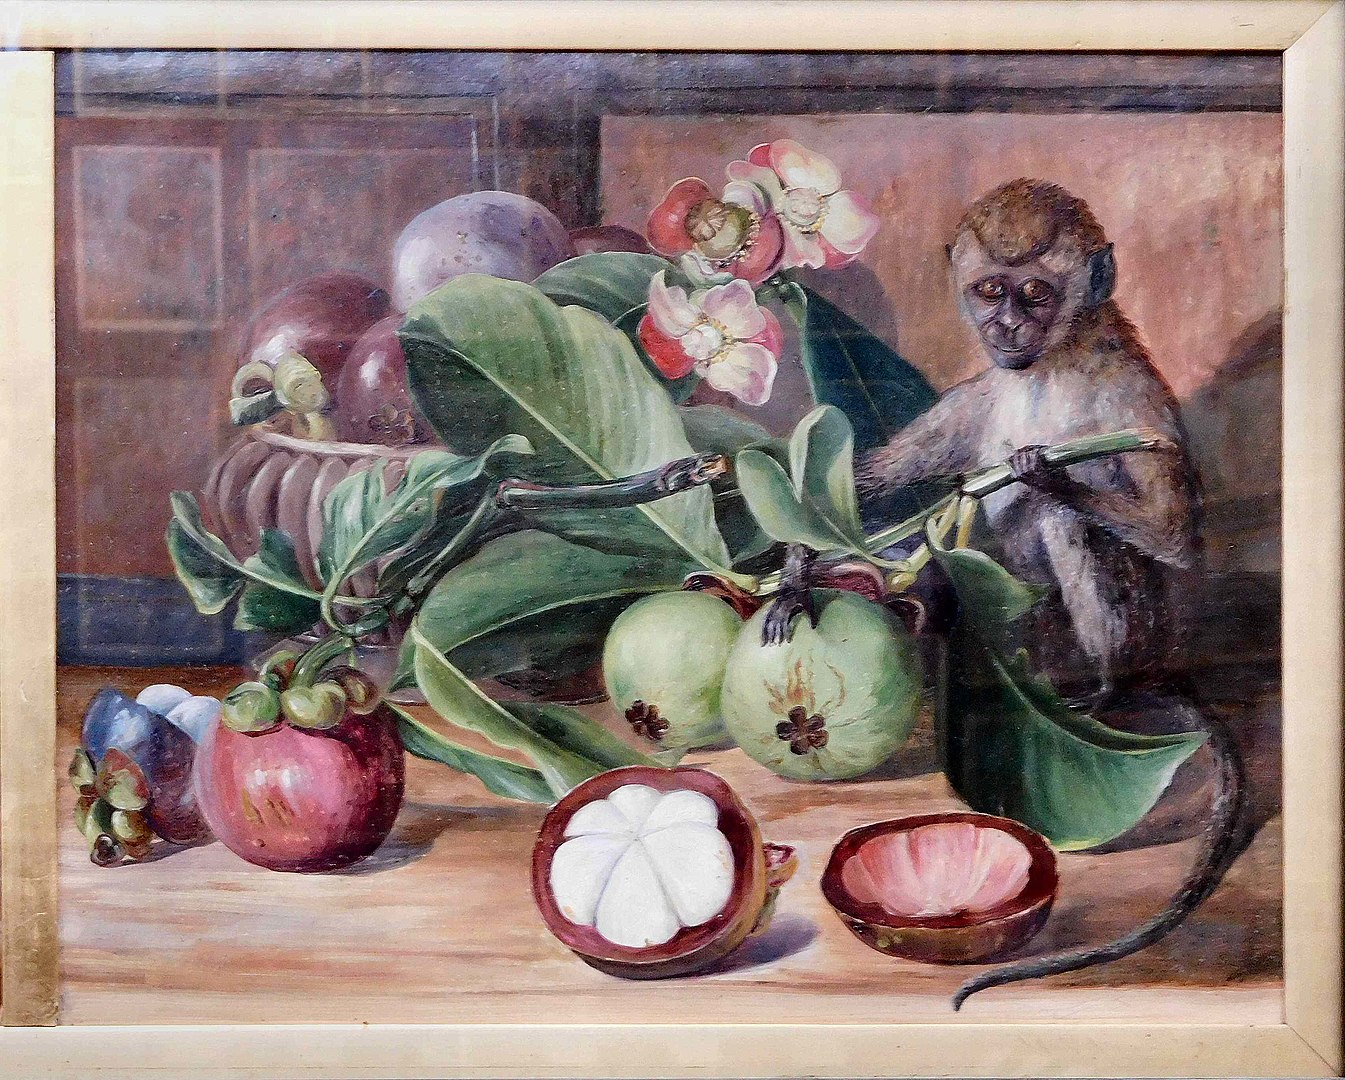 A still-life with various flowers, fruit, and a monkey